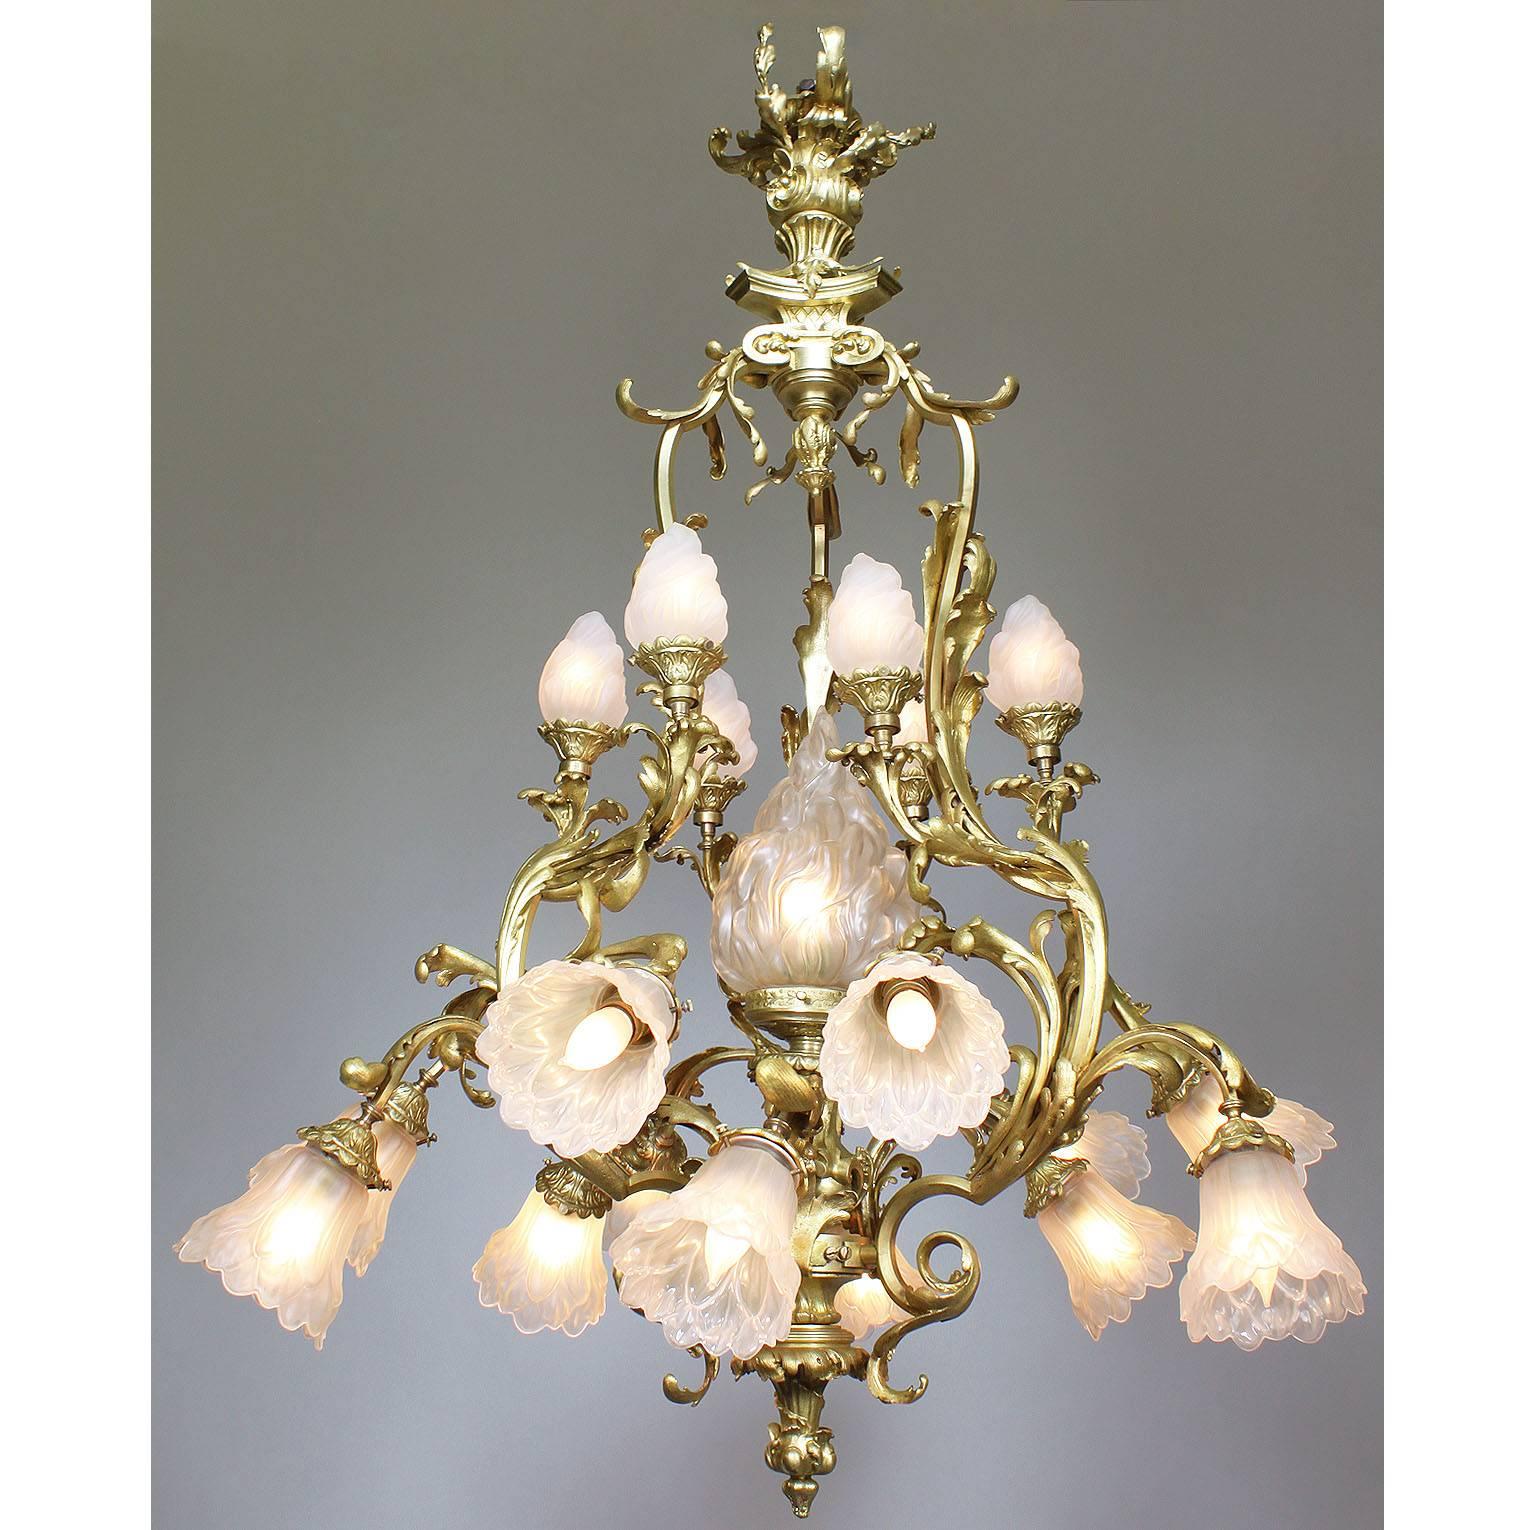 A fine French Belle Époque Rococo style gilt bronze and frosted glass shades nineteen light chandelier. The ornate gilt bronze frame surmounted six upper scrolled candle arms with frosted glass shades in the form of burning flames centered with a